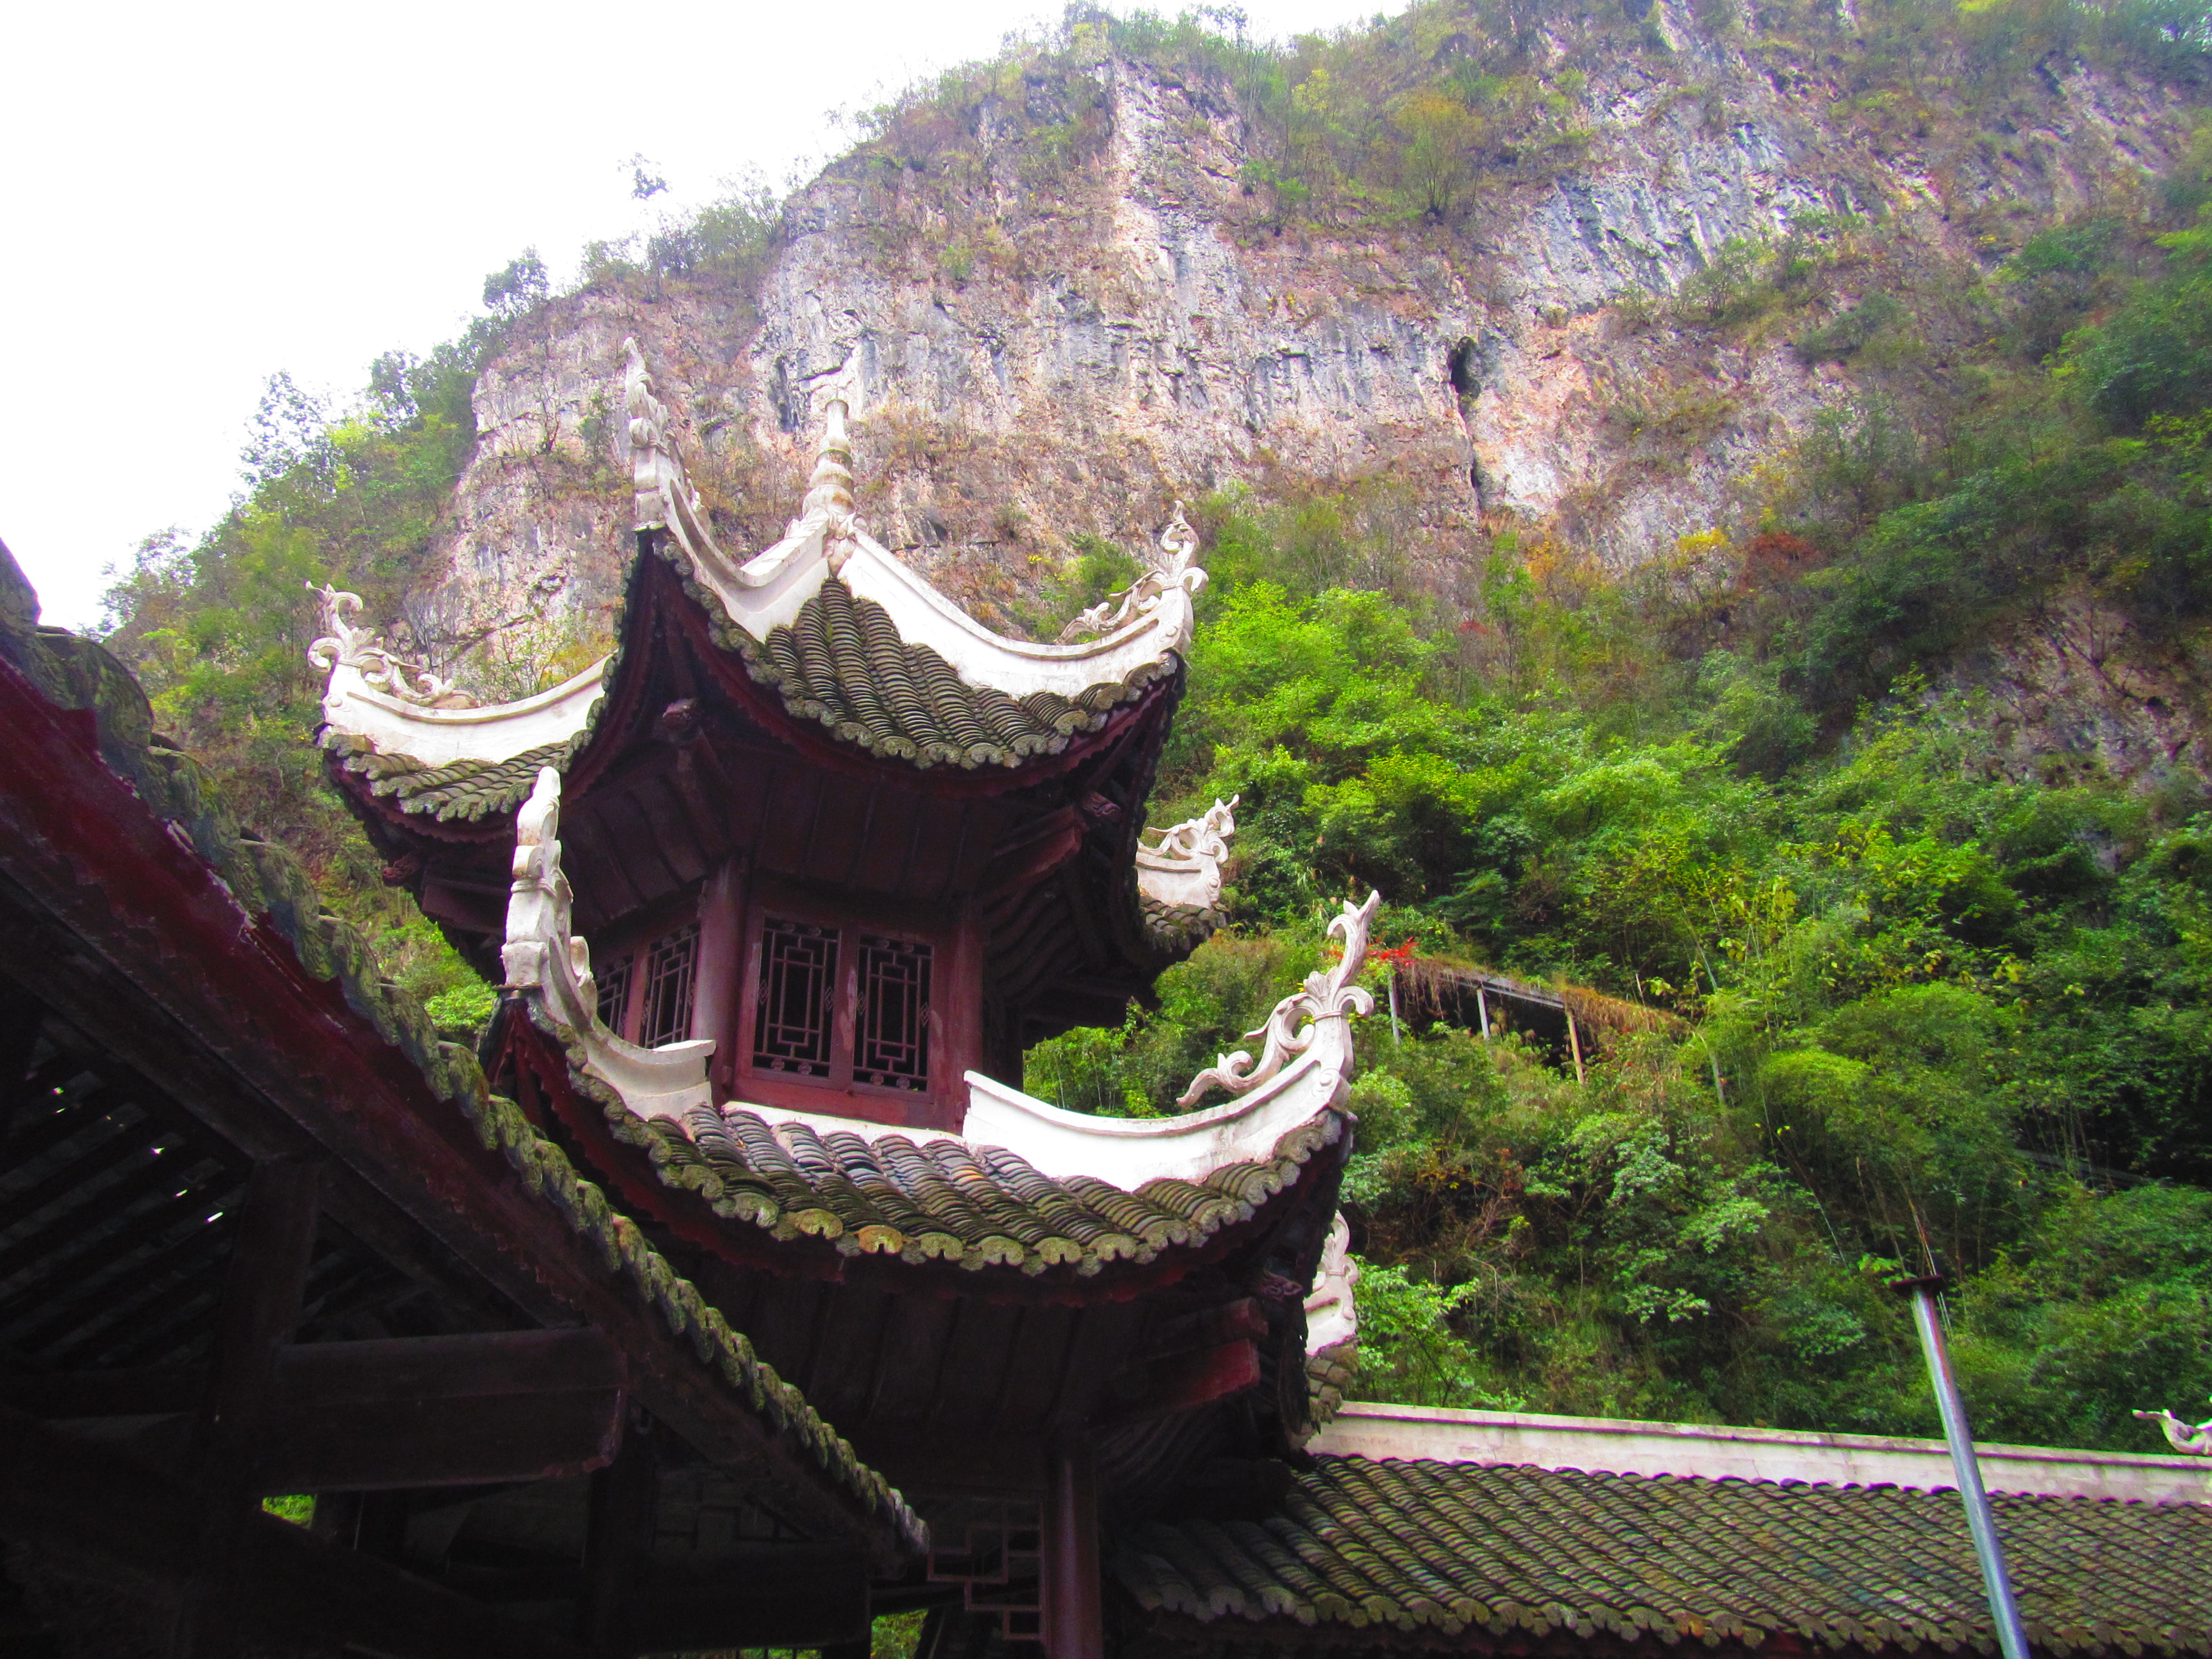 A pagoda with Guizhou mountains in the background :)